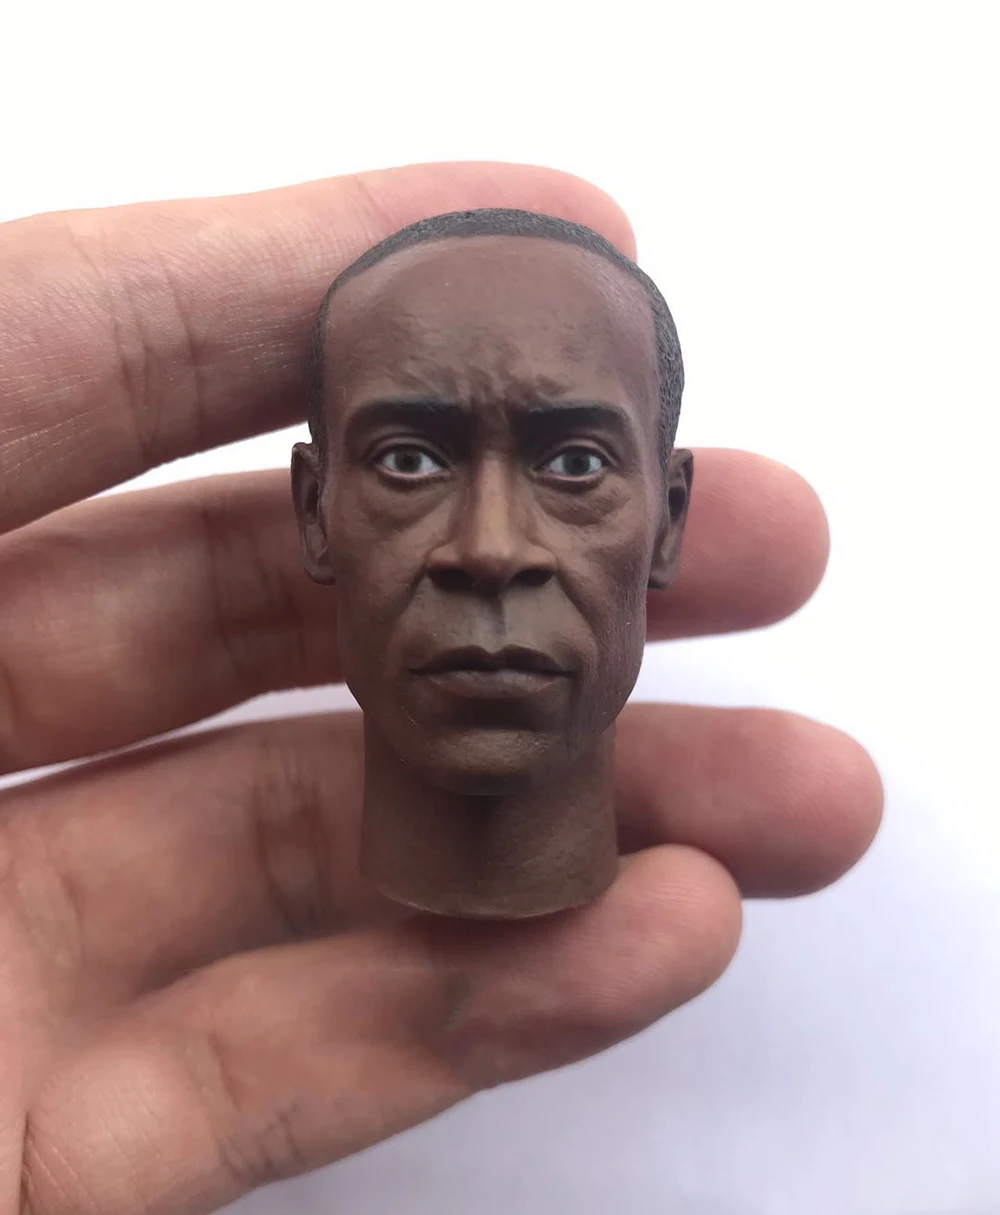 

In Stock 1/6 War machine Patriot Black Don Cheadle Male Head Sculpture Carving Model Fit For 12inch Action Body